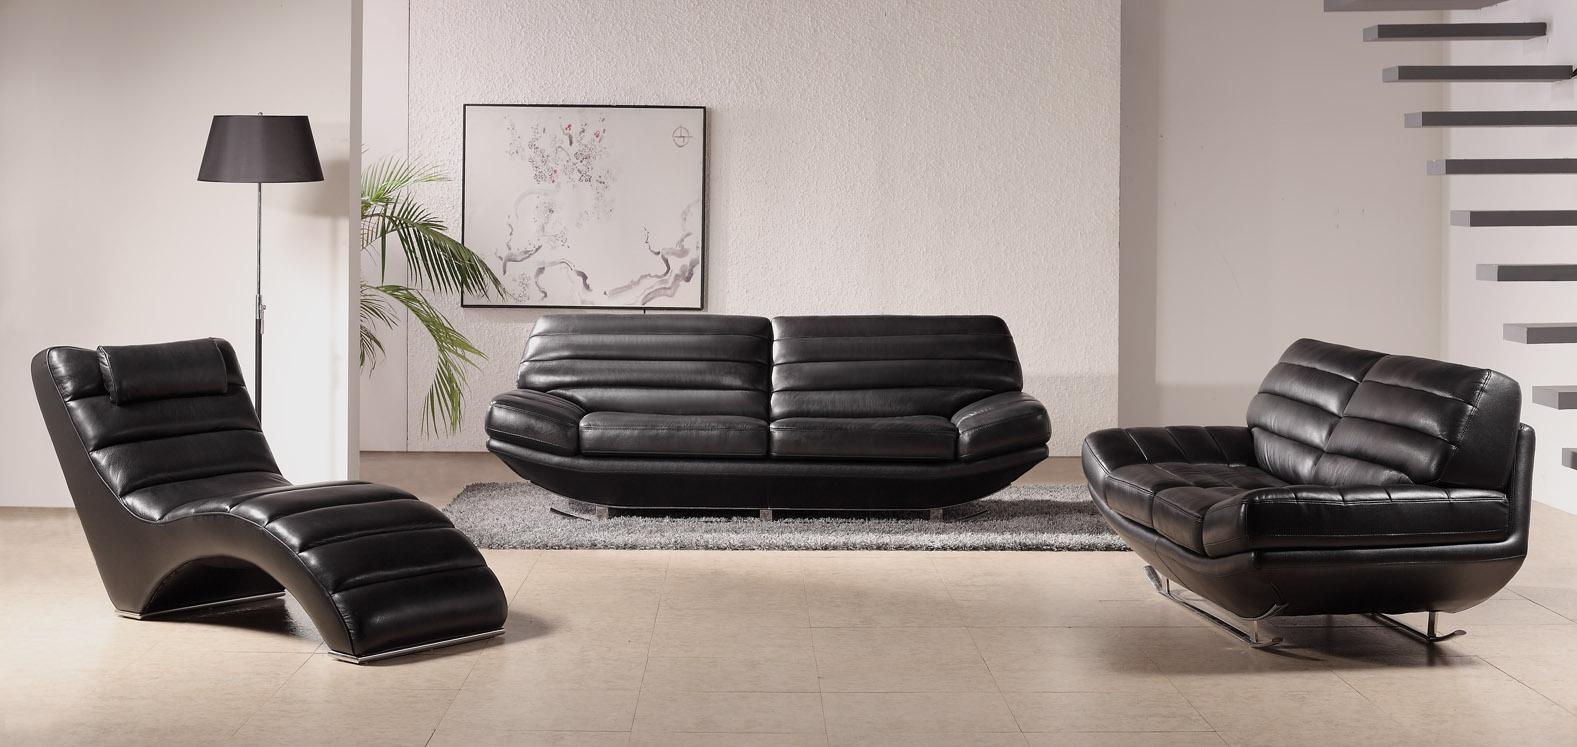 Modern Living With Wonderful Modern Living Room Design With Black Colored Contemporary Sofas Made From Leather And Cream Colored Floor Which Is Made From Marble Blocks  Remarkable Beautiful Contemporary Sofas With Various Elegant Styles